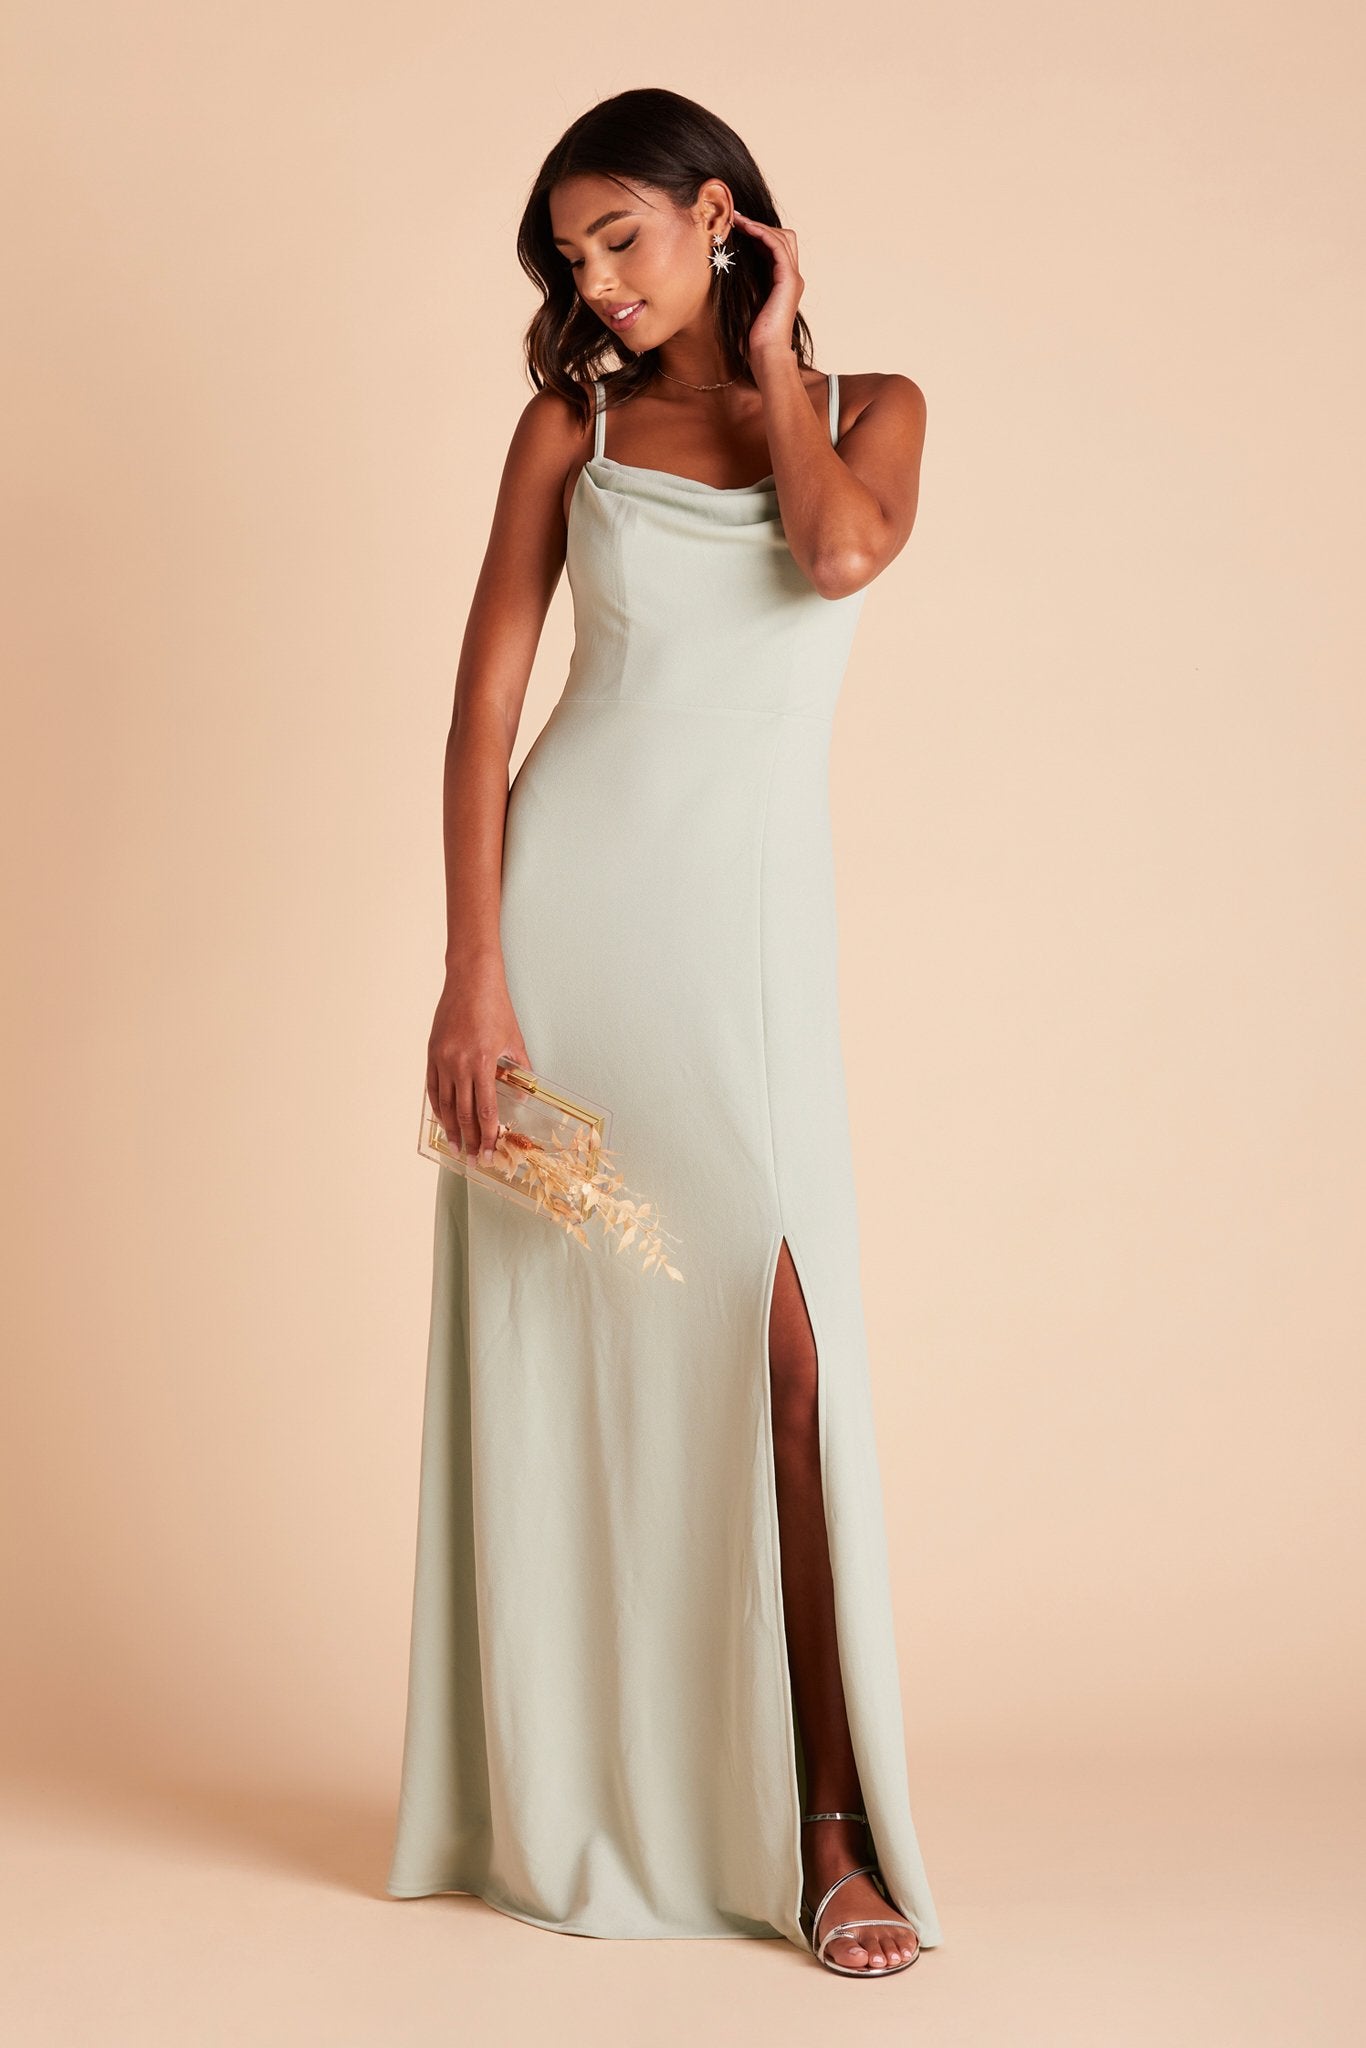 Bridesmaid Dresses for sale in Brits, North West